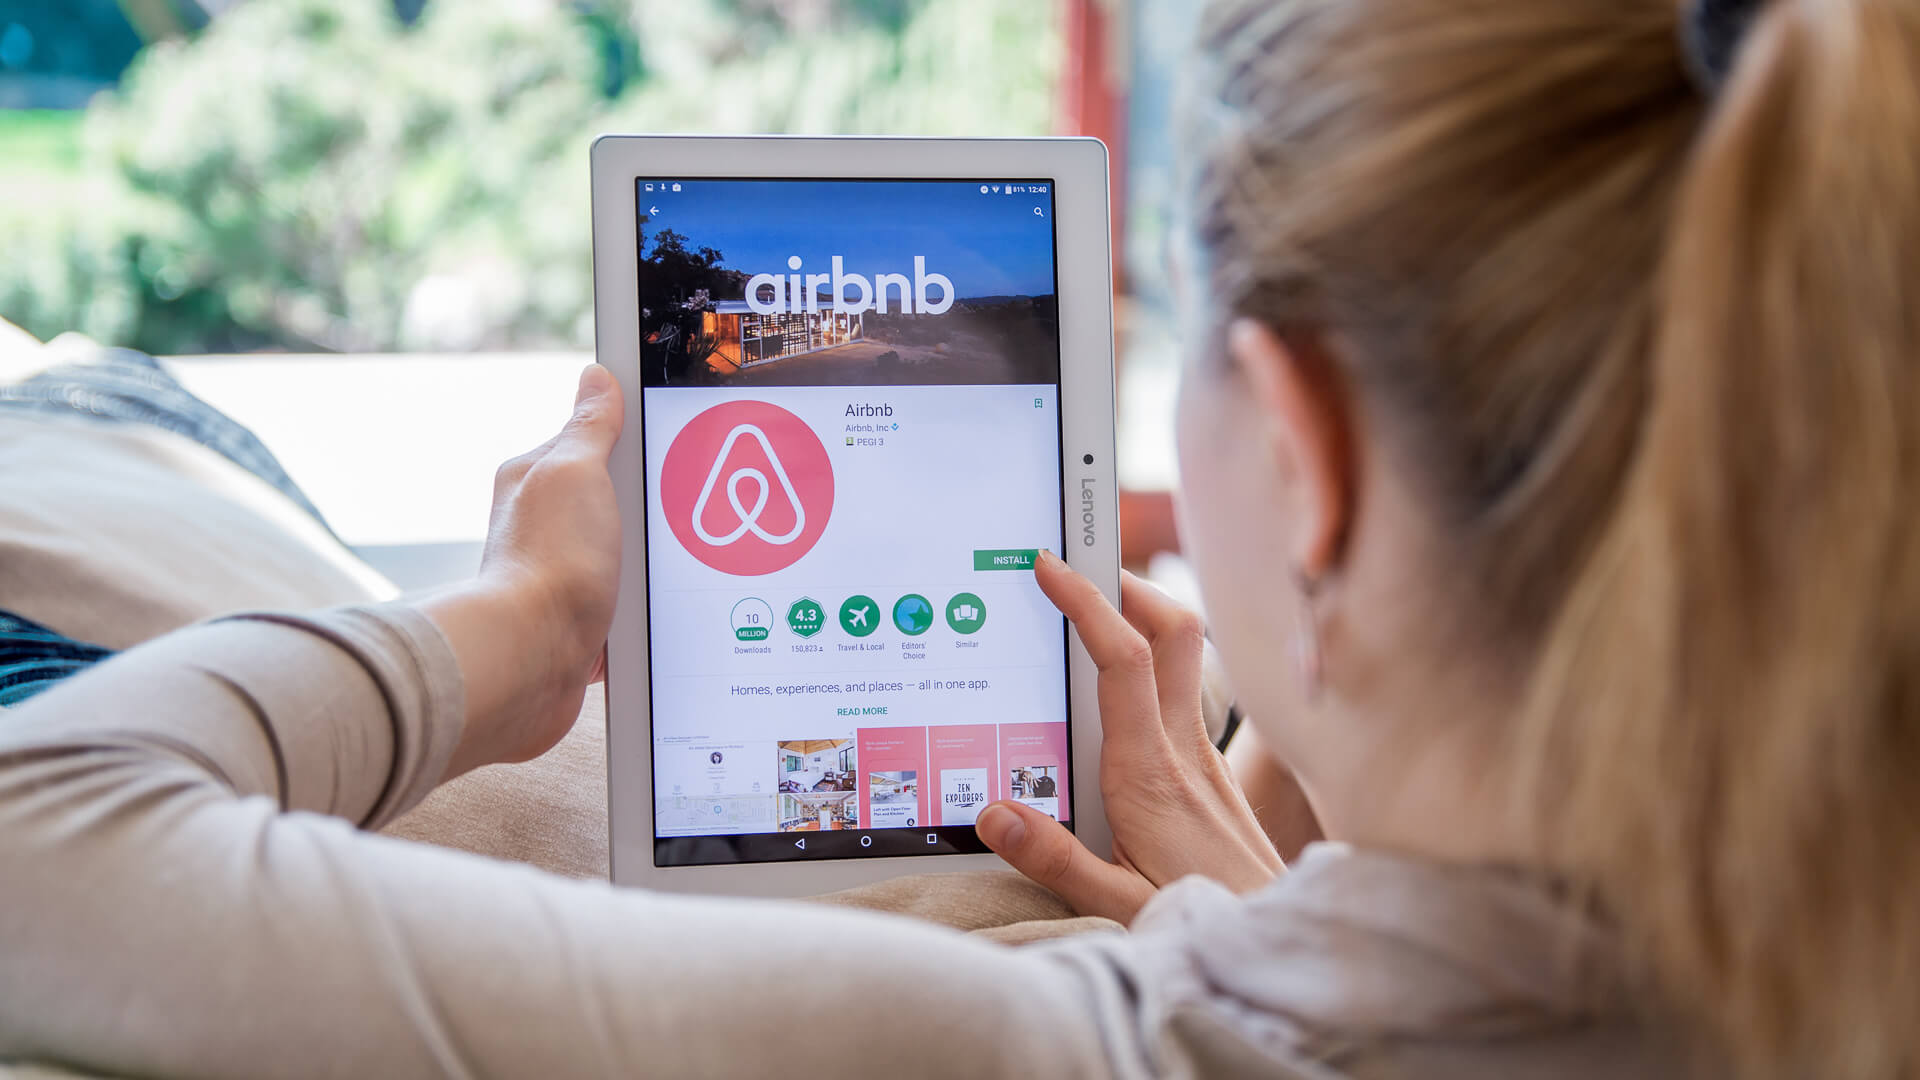 An Airbnb collapse won't fix America's housing shortage - Vox